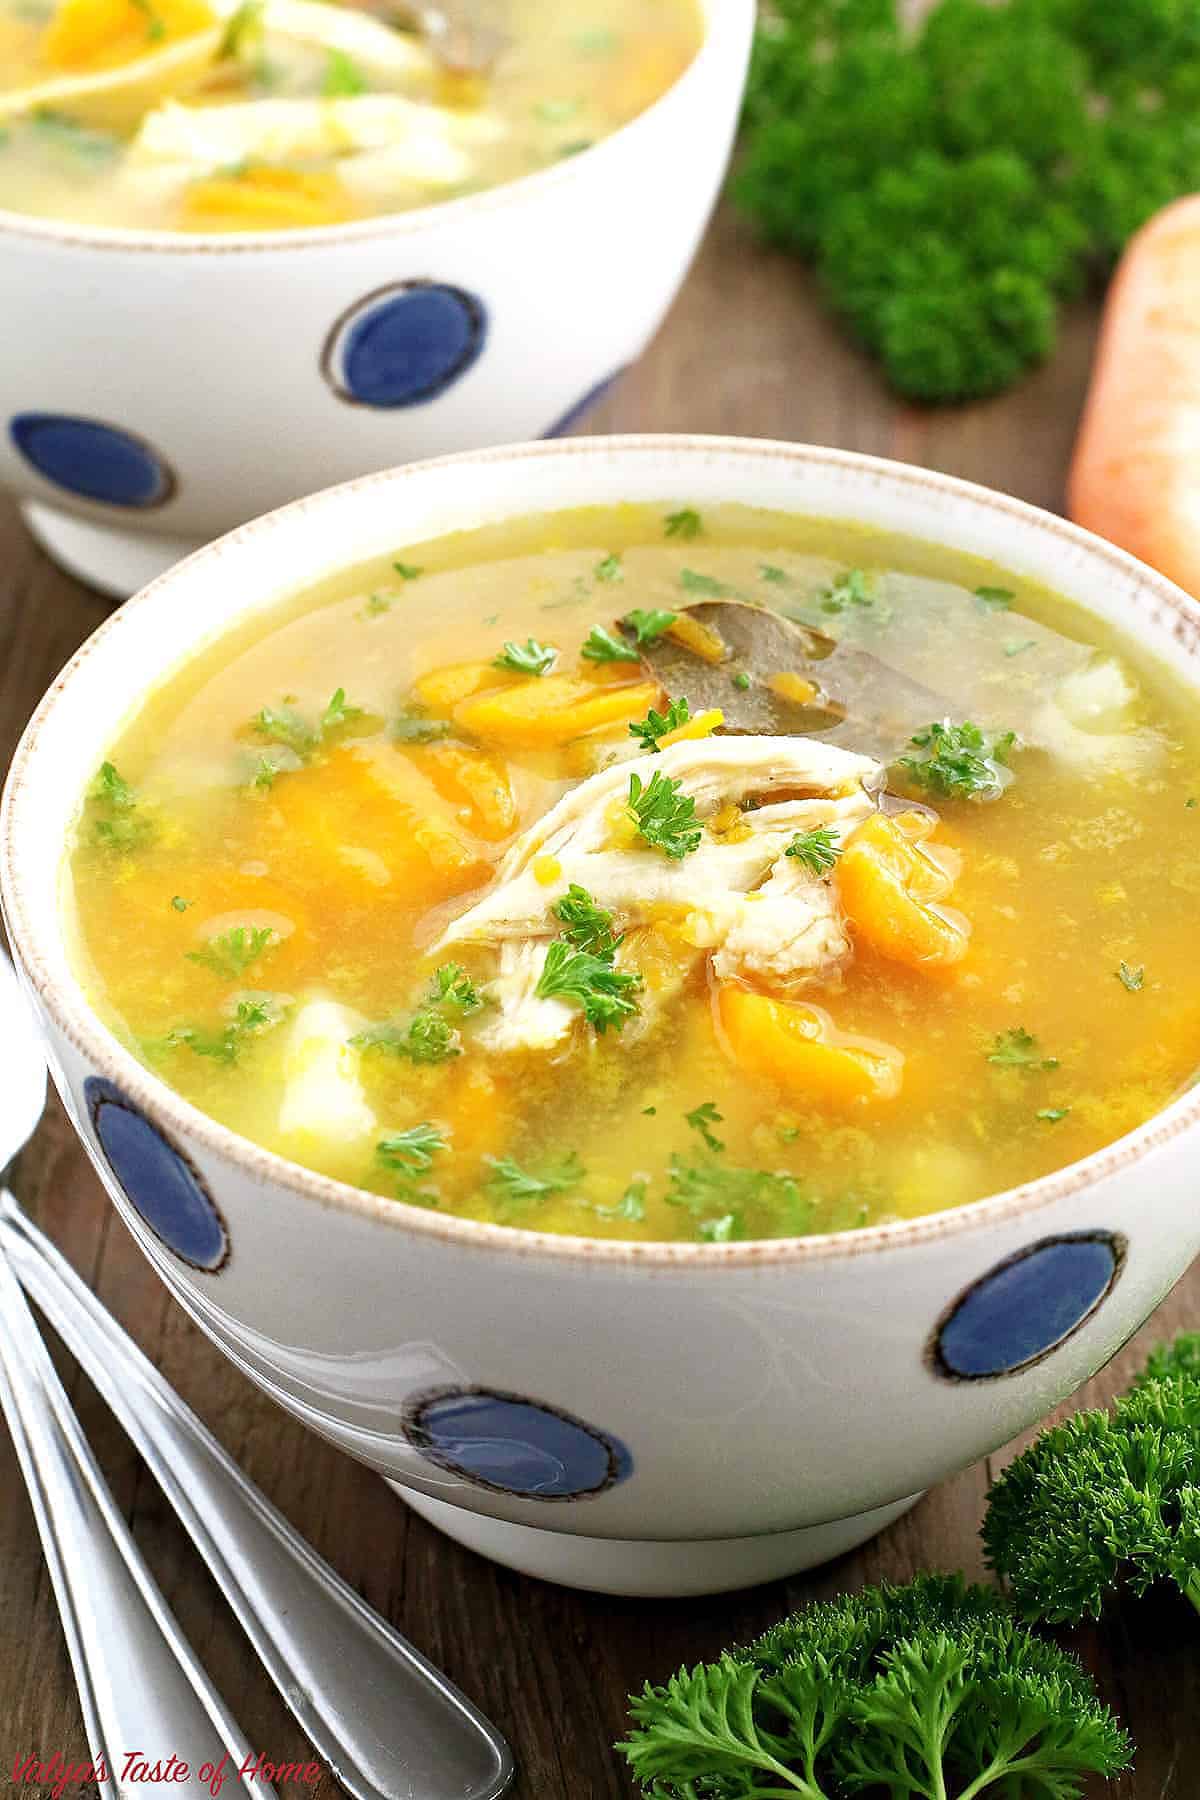 What goes well with a chilly, fall day? A hearty bowl of steamy-hot soup! This Instant Pot Chicken Split Pea Soup Recipe is unique and fantastic. It's light but also tastes rich and satisfying. It will also do a great job of keeping chills at bay and make you feel warm and cozy inside.